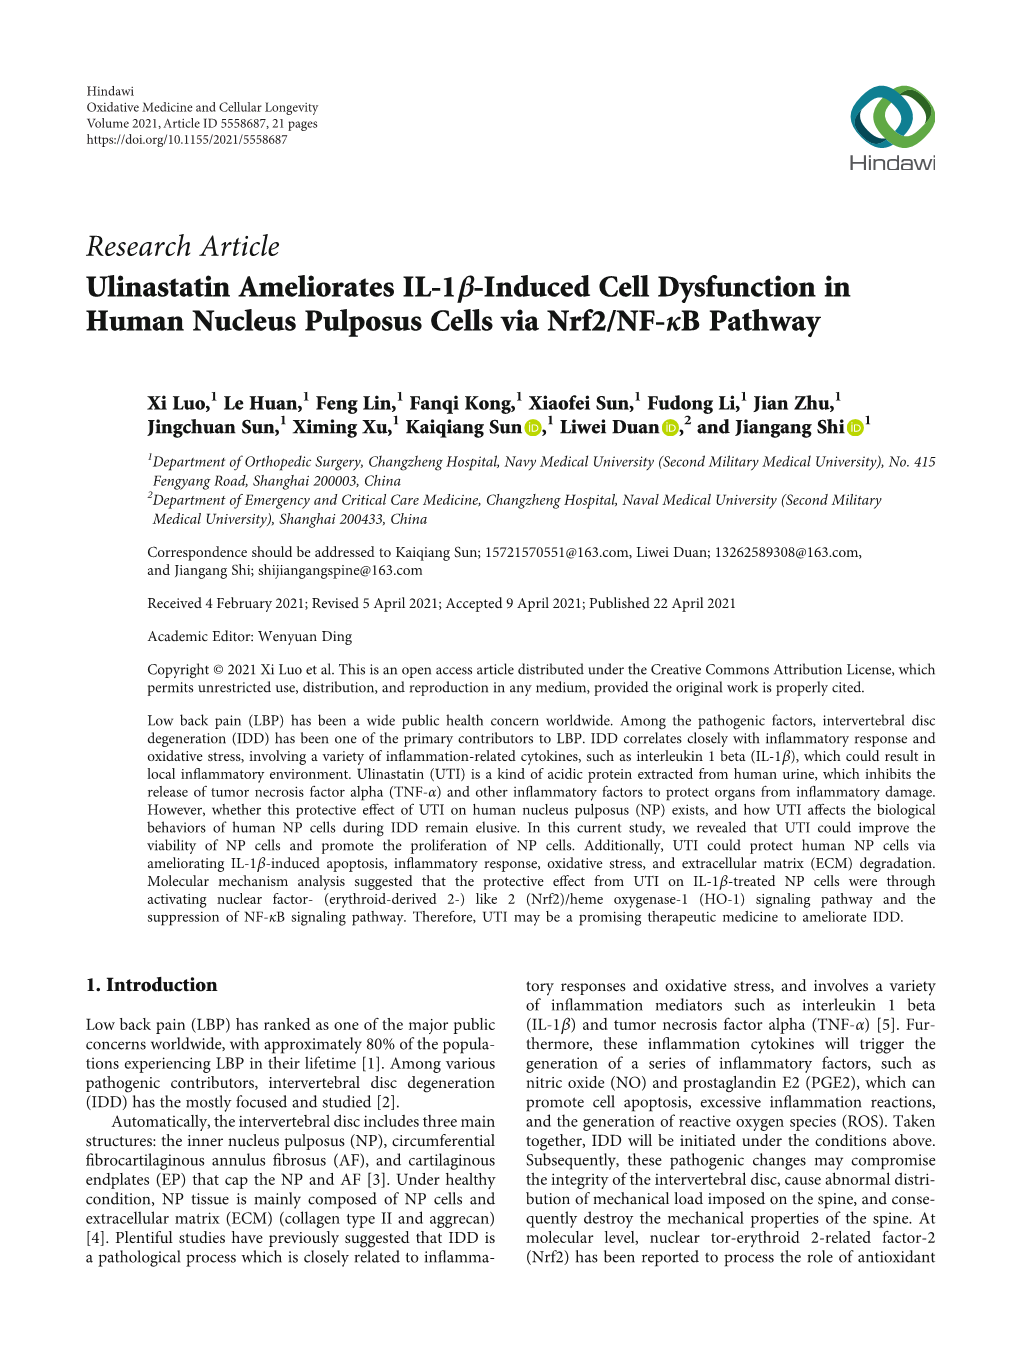 Research Article Ulinastatin Ameliorates IL-1Β-Induced Cell Dysfunction in Human Nucleus Pulposus Cells Via Nrf2/NF-Κb Pathway